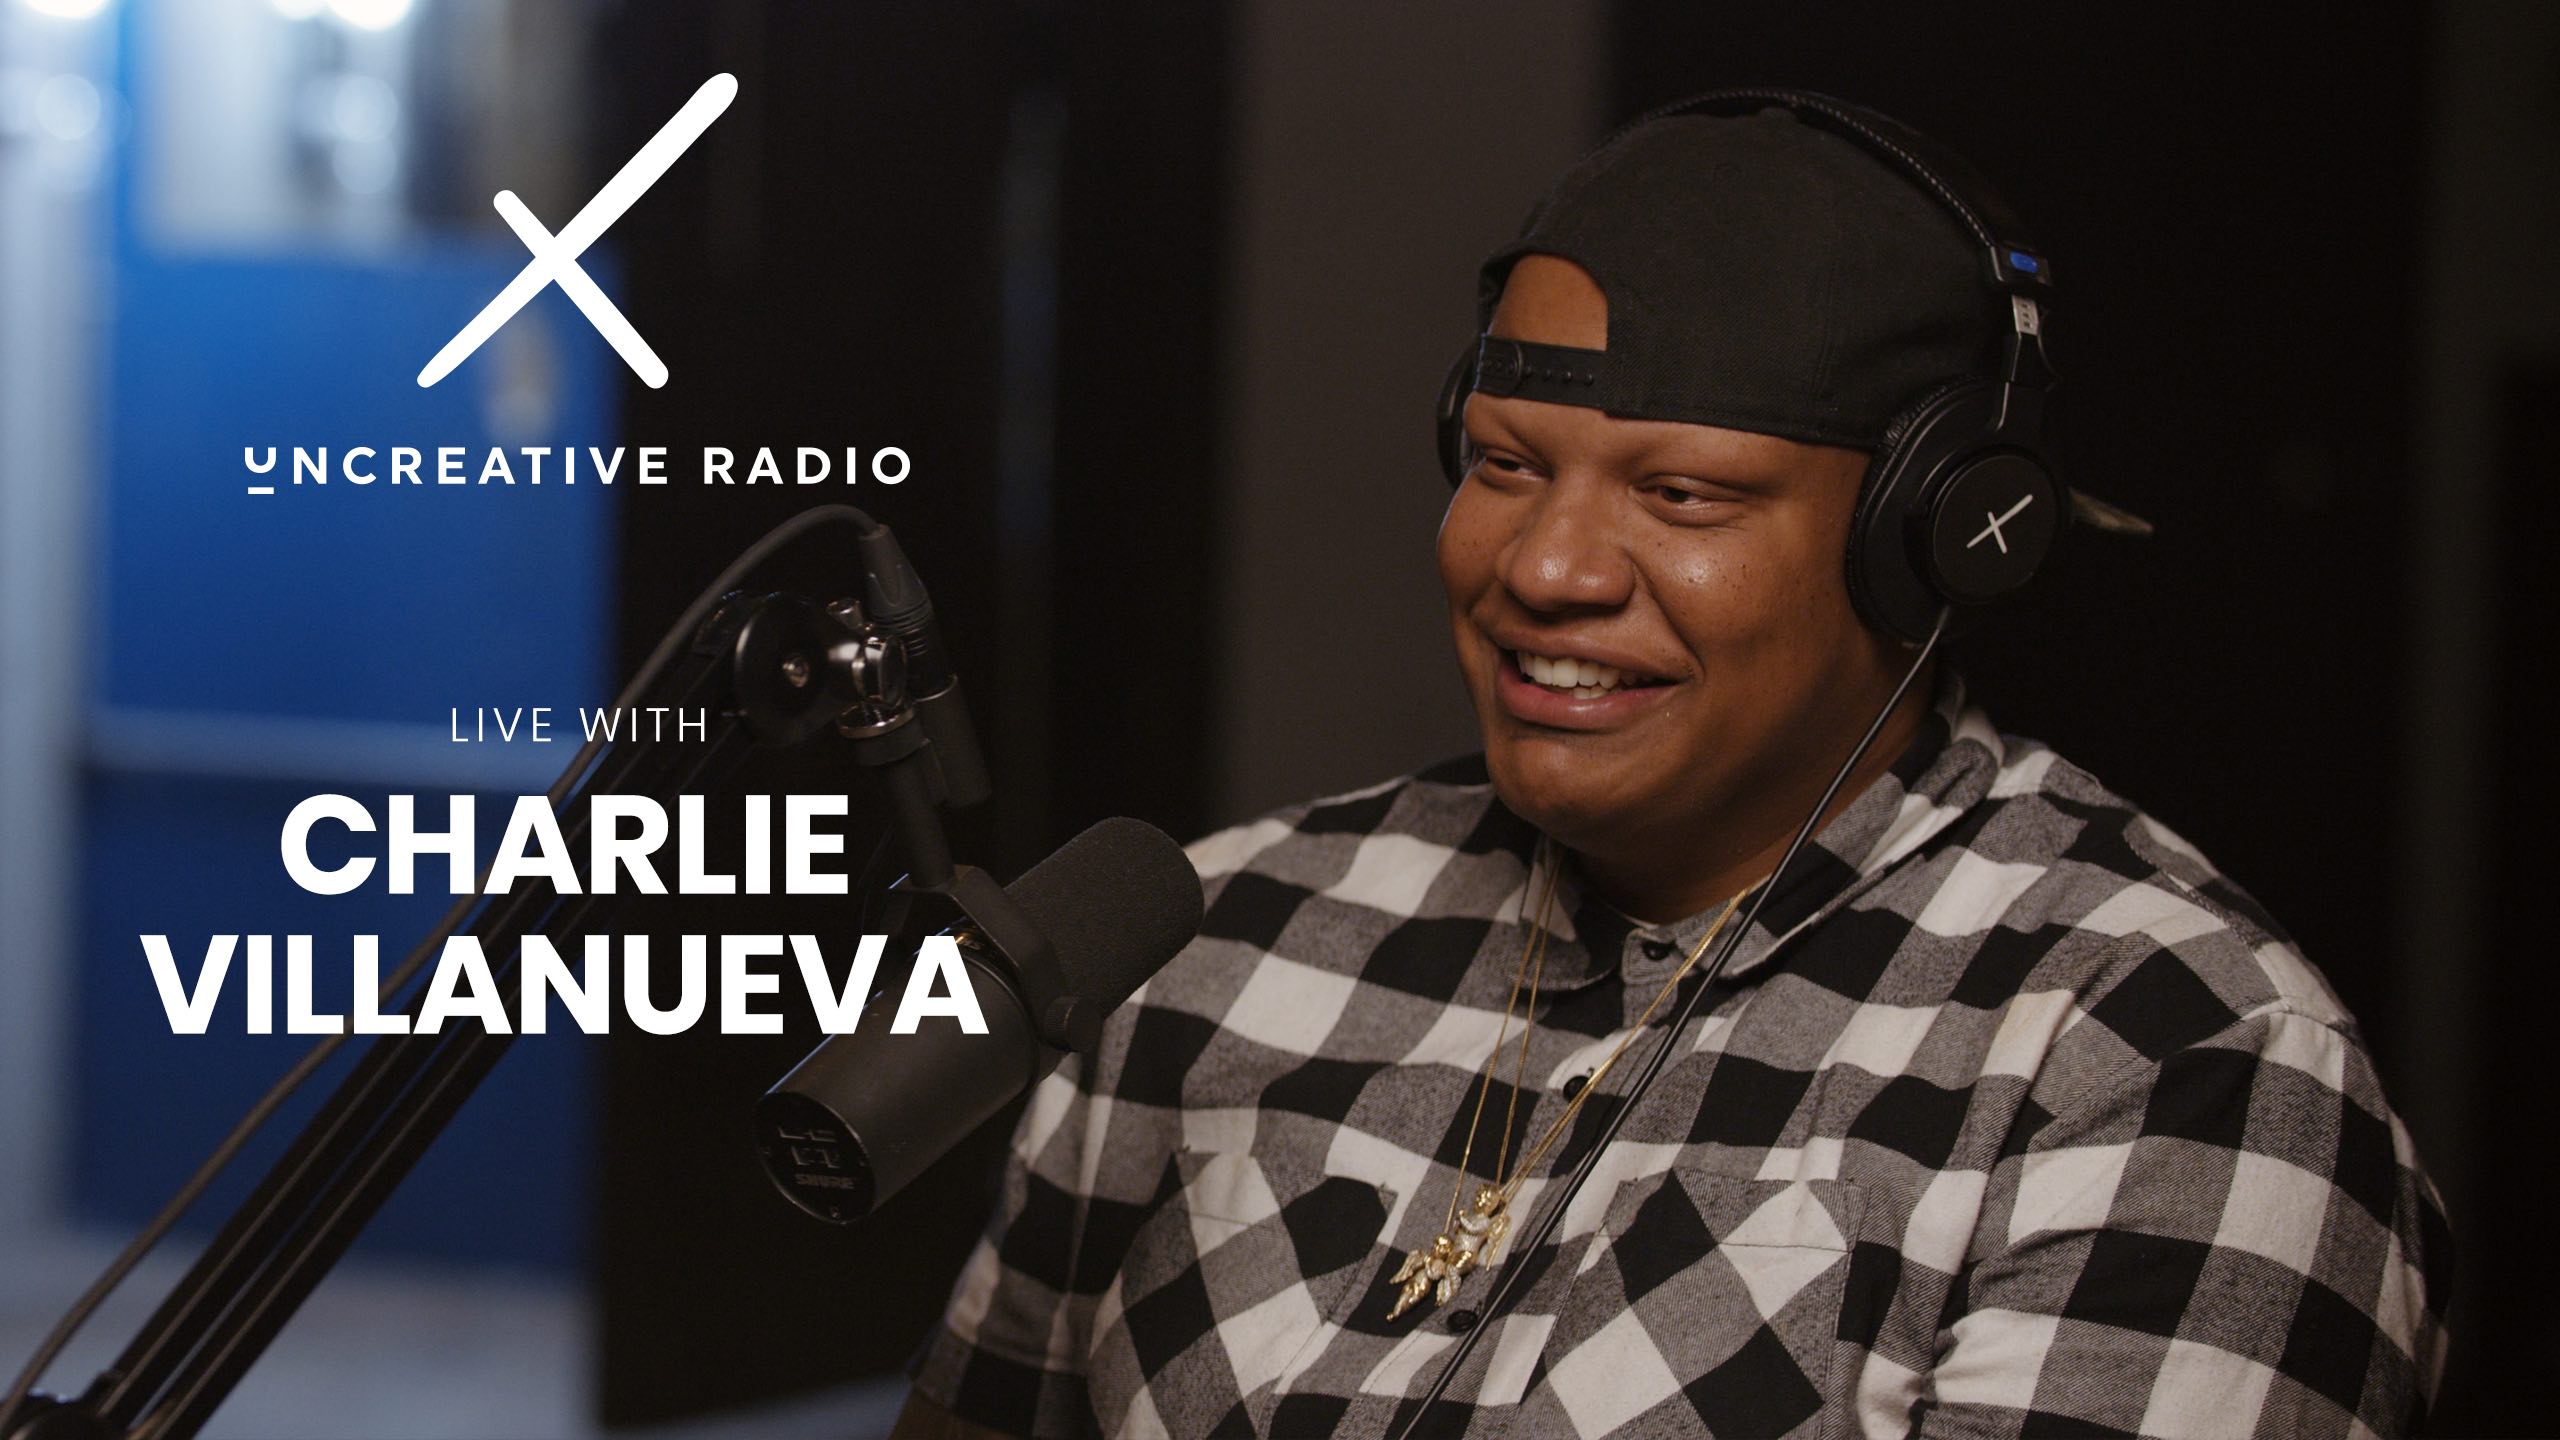 IU C&I Studios Page White Uncreative Radio Live With Charlie Villanueva logo with him wearing a black cap backwards and a black and white checkered shirt by a microphone and smiling